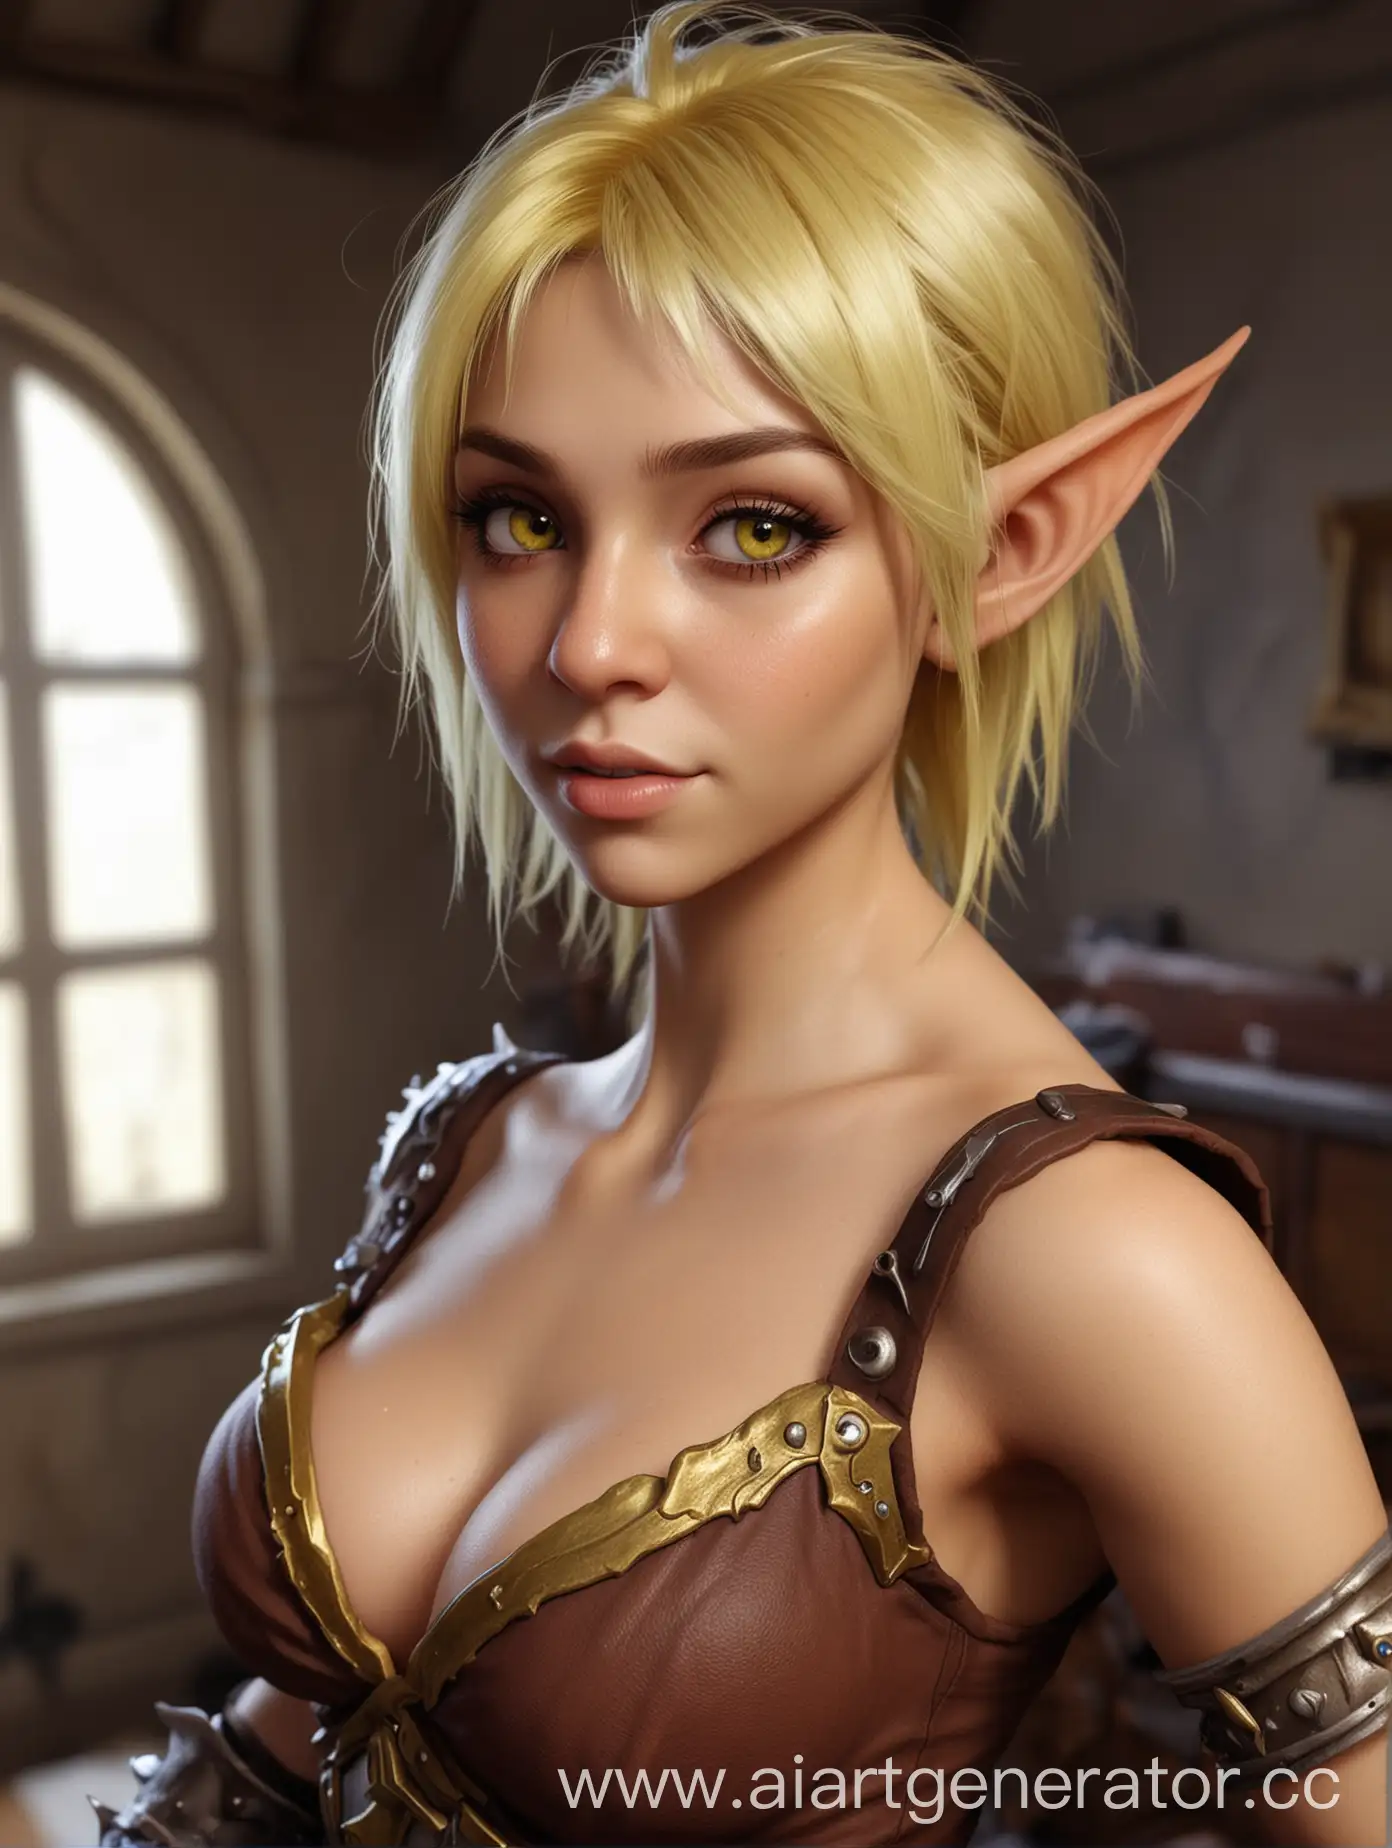 Realistic-World-of-Warcraft-Hybrid-Girl-in-Apartment-Selfie